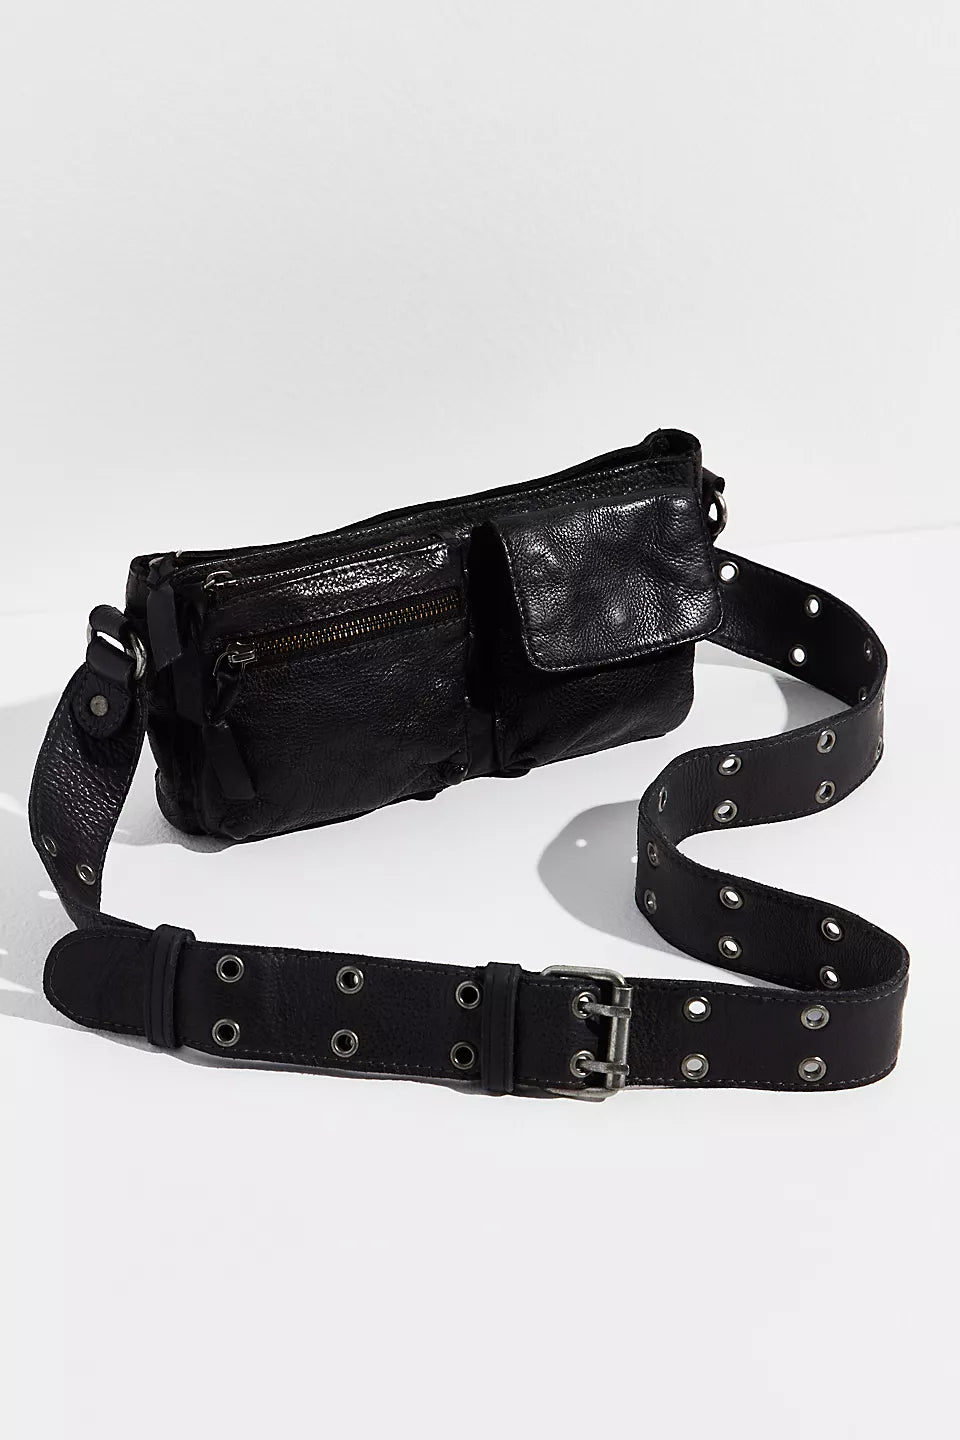 Wade Leather Sling | Free People